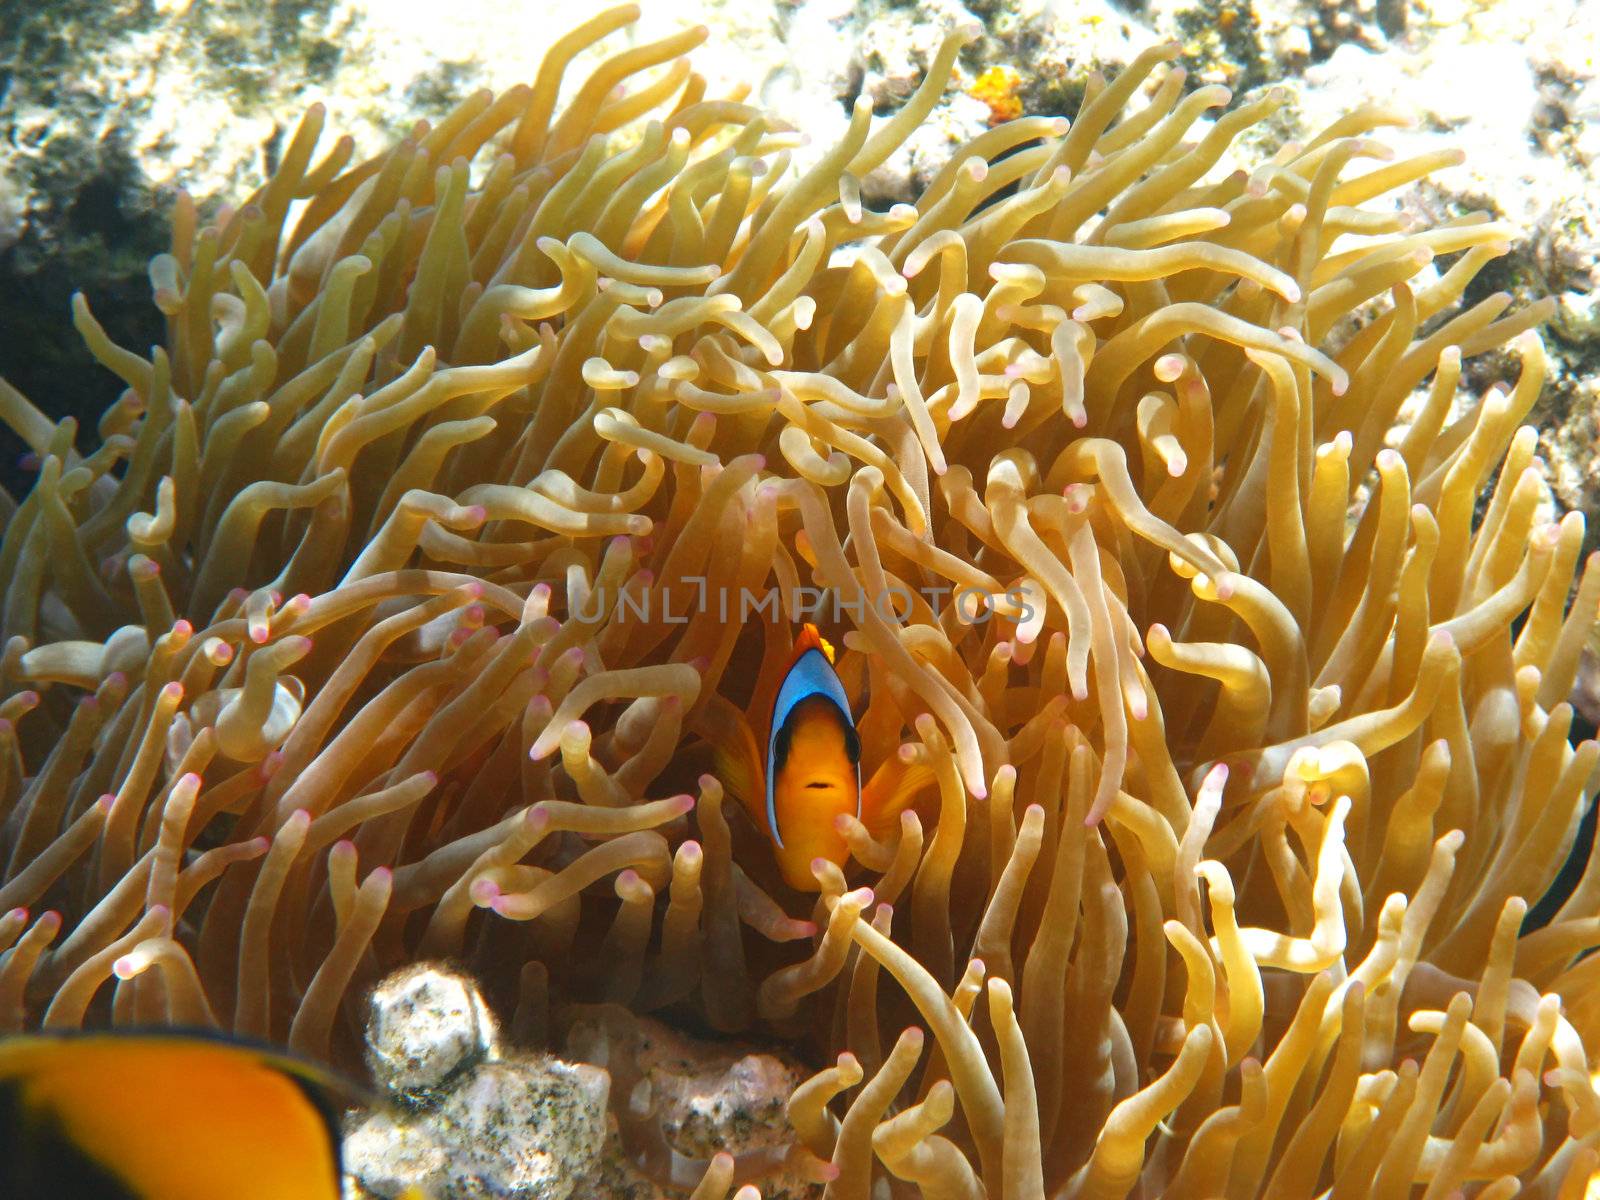 Two-banded clownfish and sea anemones in Red sea